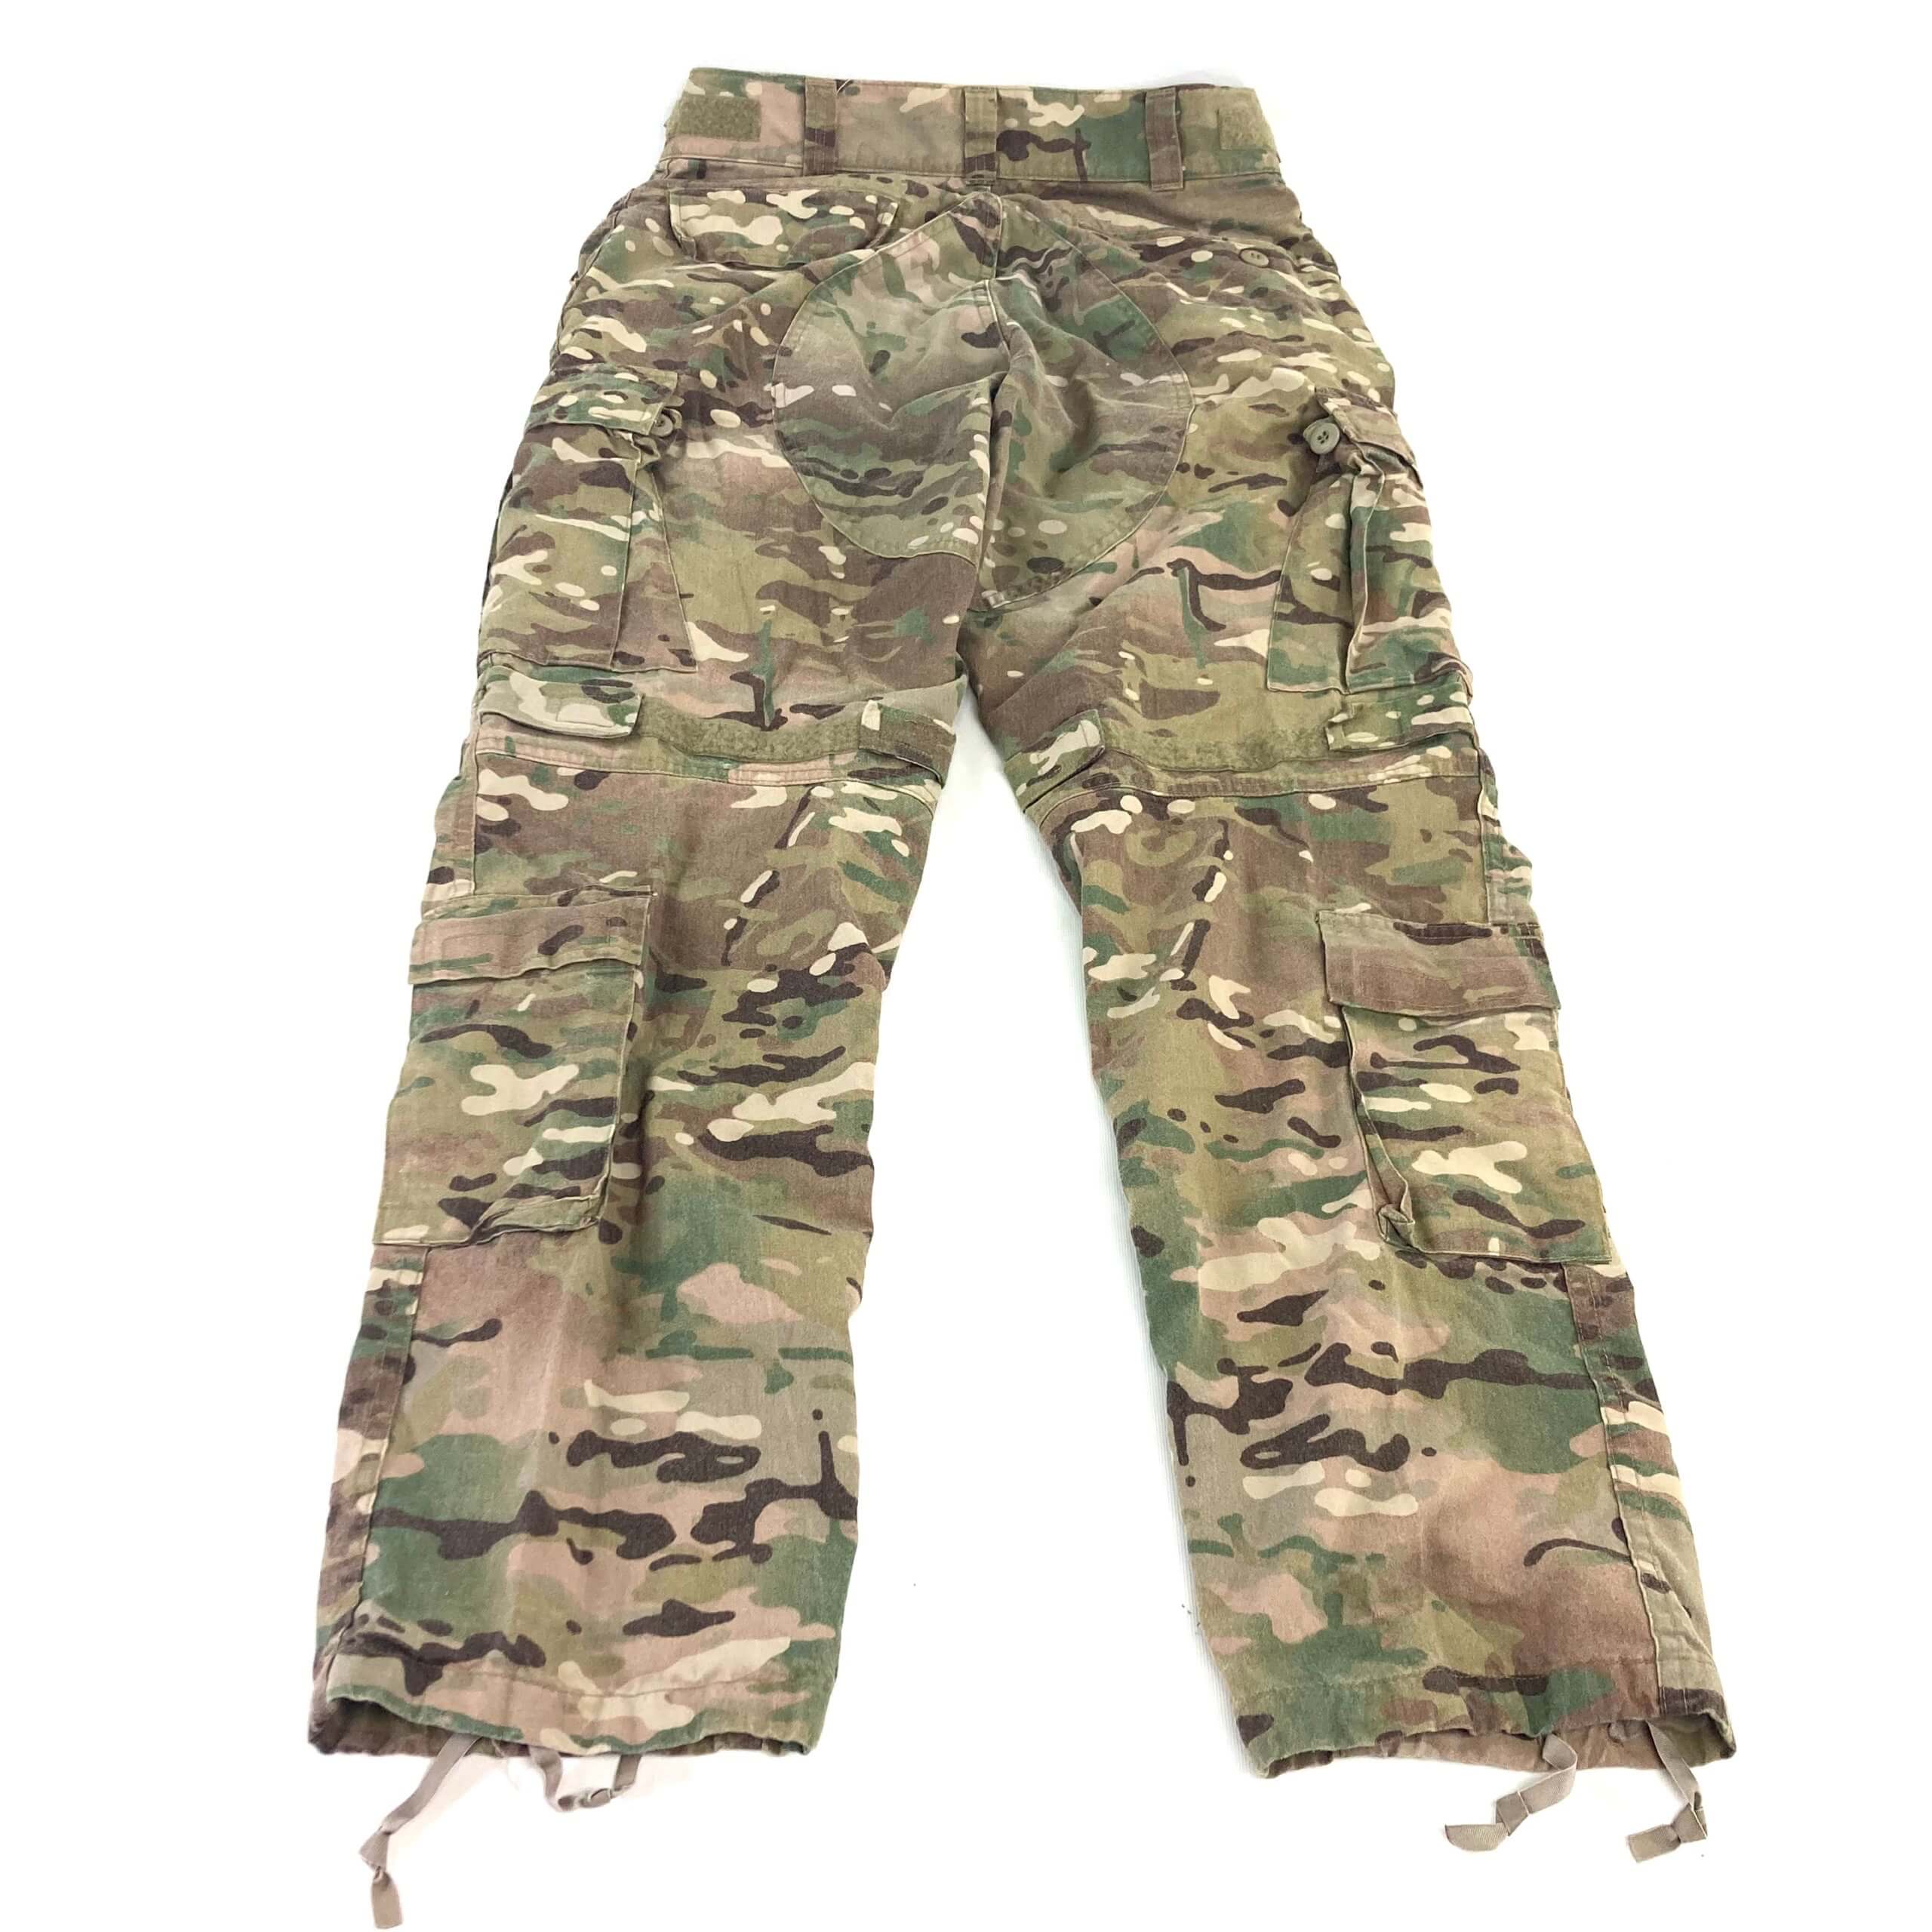 Attend Canberra Median Multicam Combat Pants W/ Knee Pad Slots [Genuine Issue]